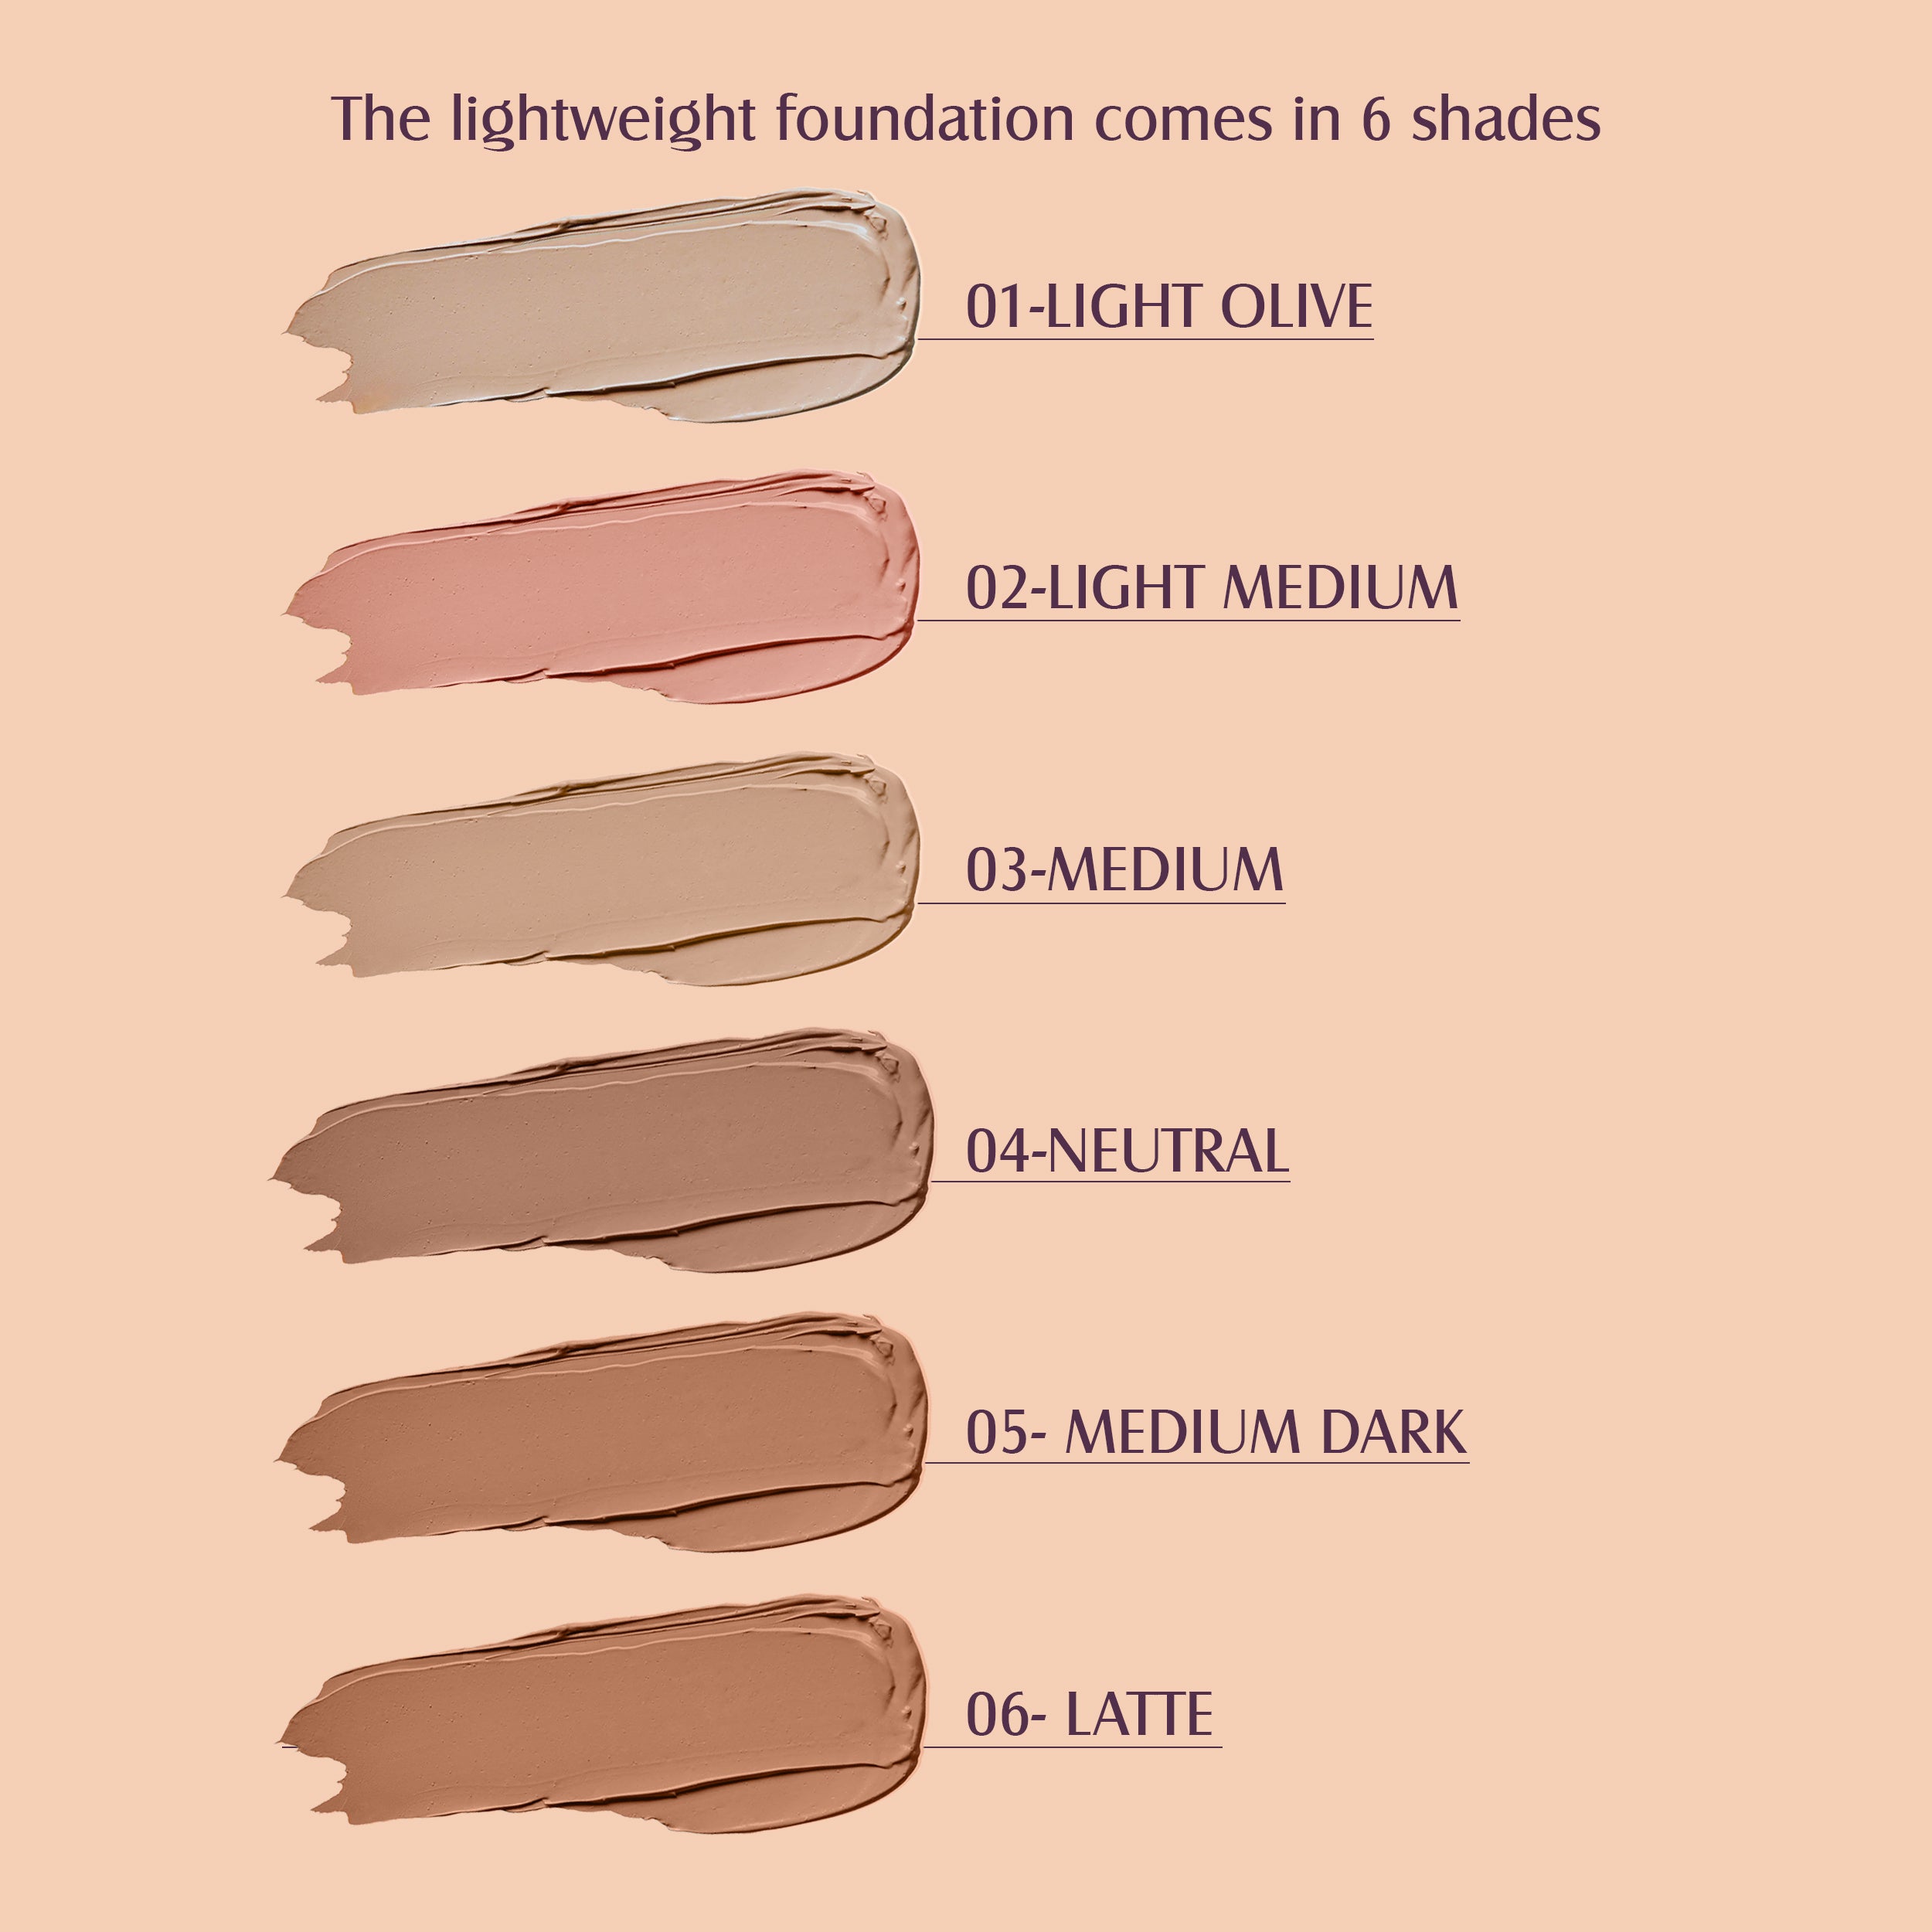 Glam21 Blendable Tube Foundation | Hides Skin Imperfections, Dark Spots, Fine lines | Lightweight | Suitable for All | 6 Shades Match Indian Skin Tones | 50gm-01-Light Olive-50gm